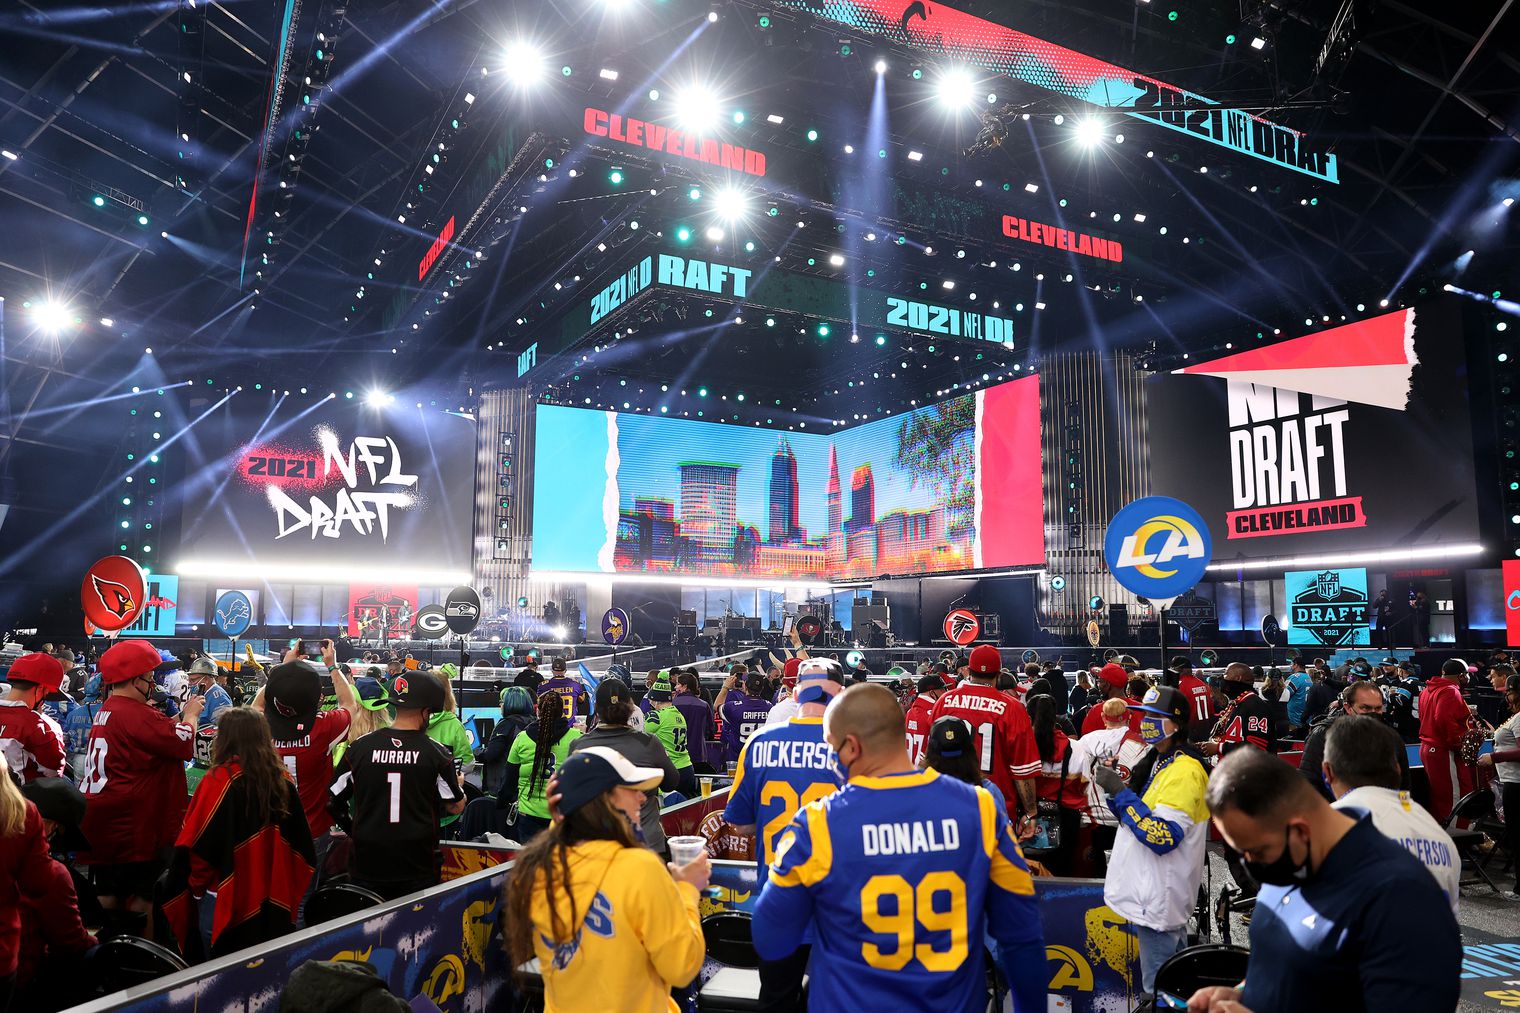 2021 NFL Draft: Day 2 Schedule, how to watch, streaming information